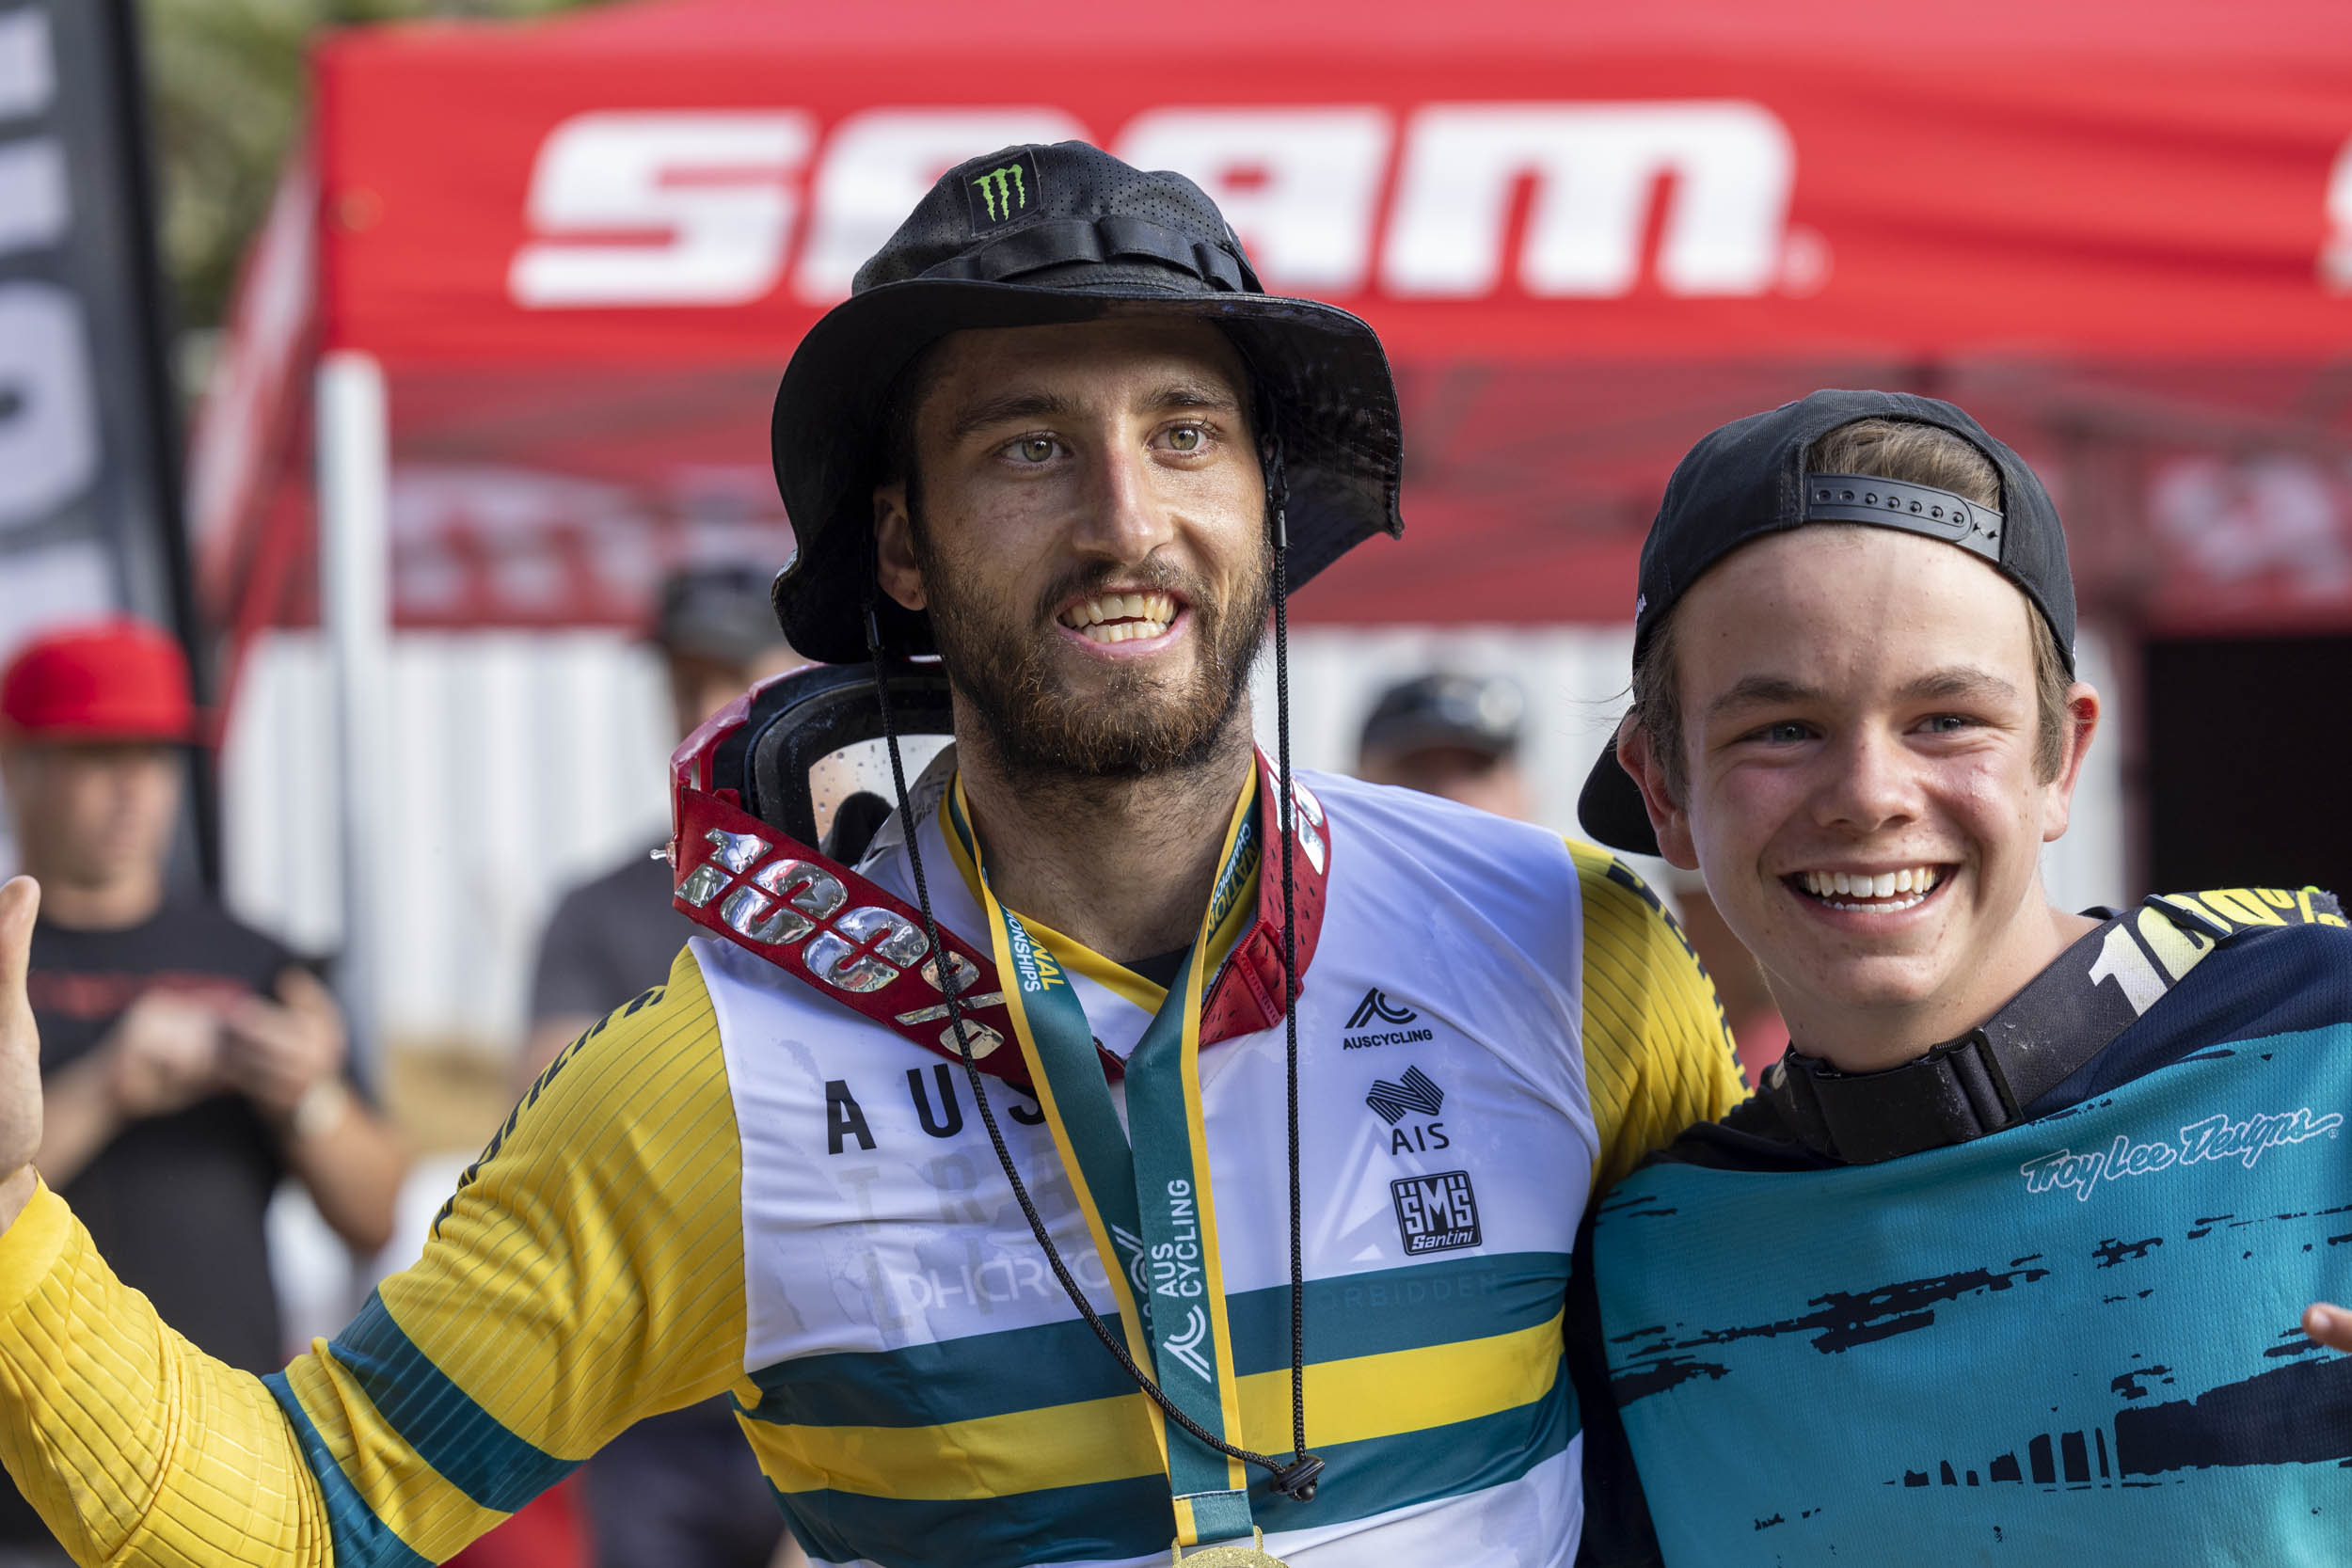 Monster Energy’s Connor Fearon Takes First Place at Australian Mountain Bike Downhill Championships in Maydena